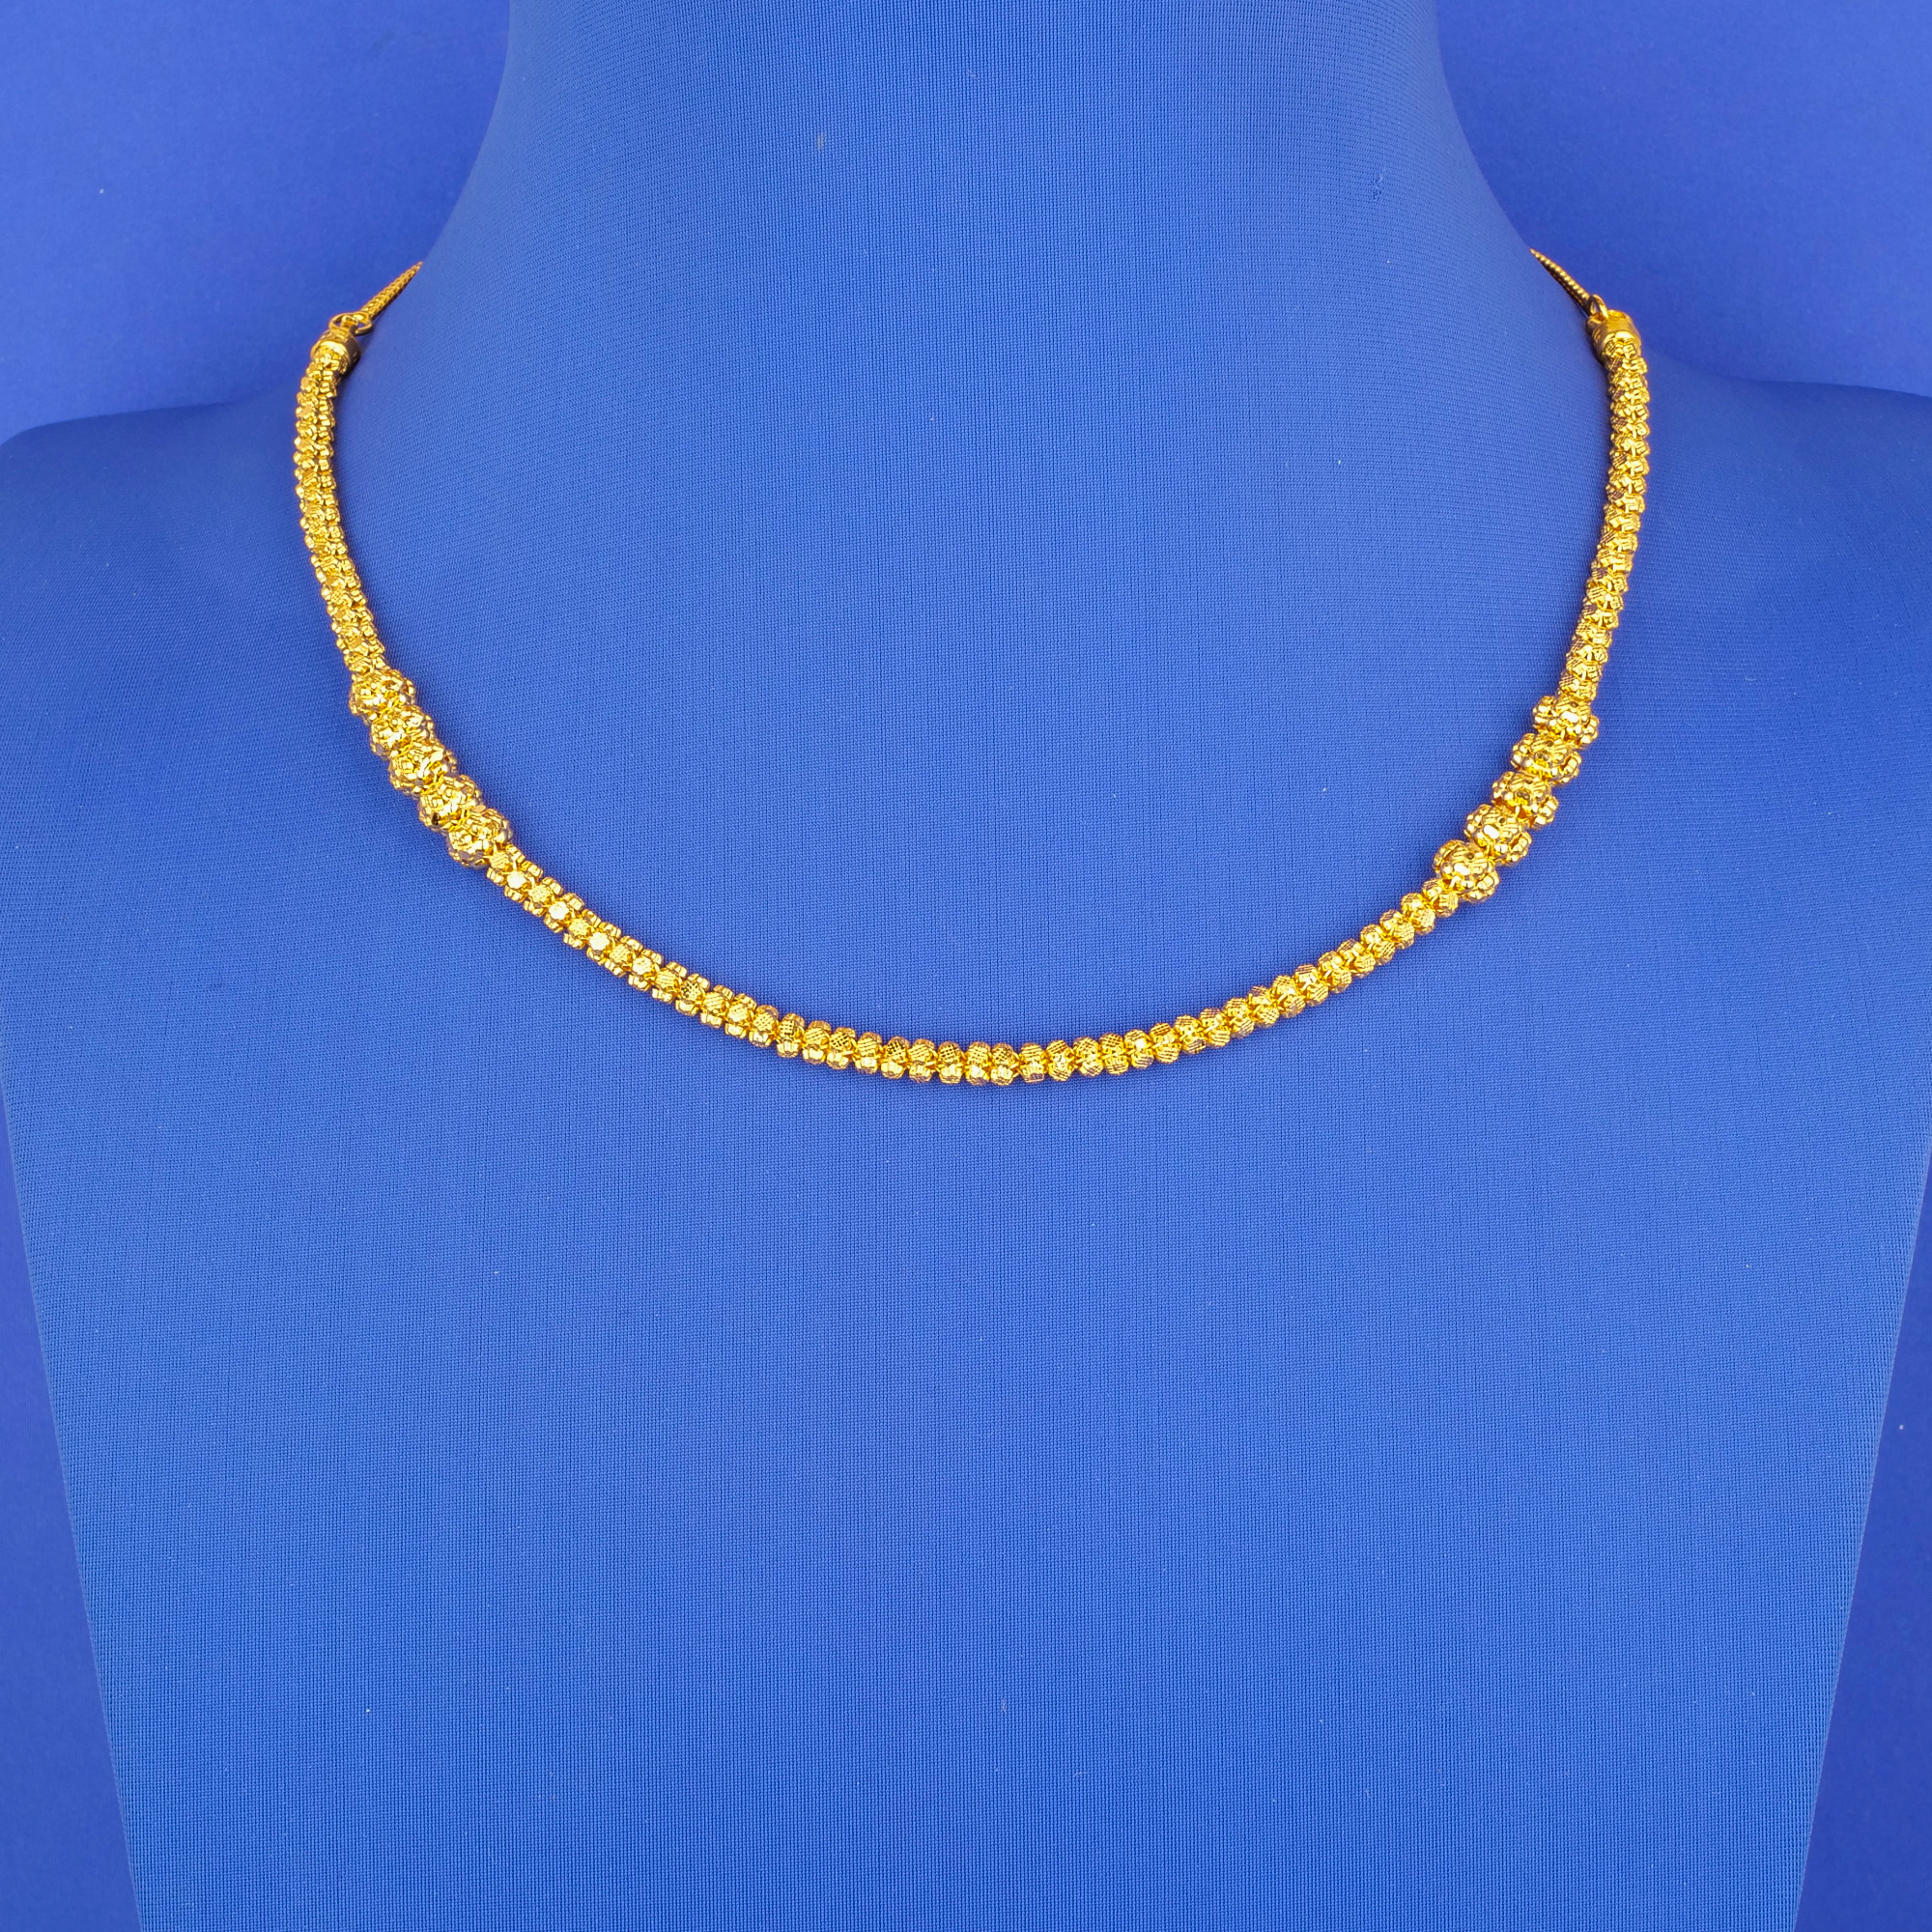 22K Gold Necklace/Chain